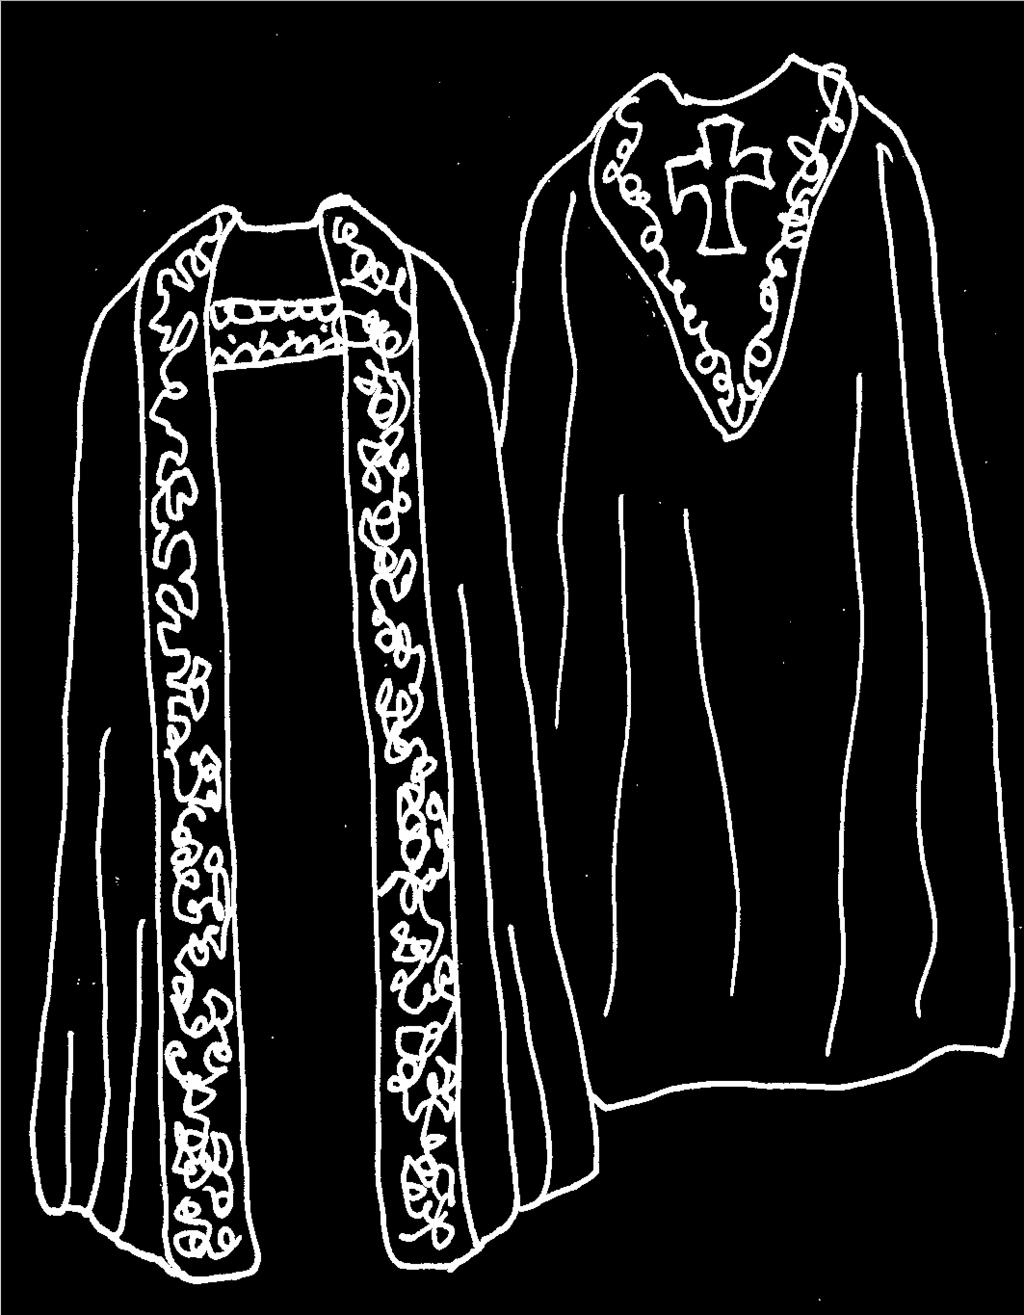 The cope can be quite plain or very ornate it s up to the bishop who wears it. Which would you like?